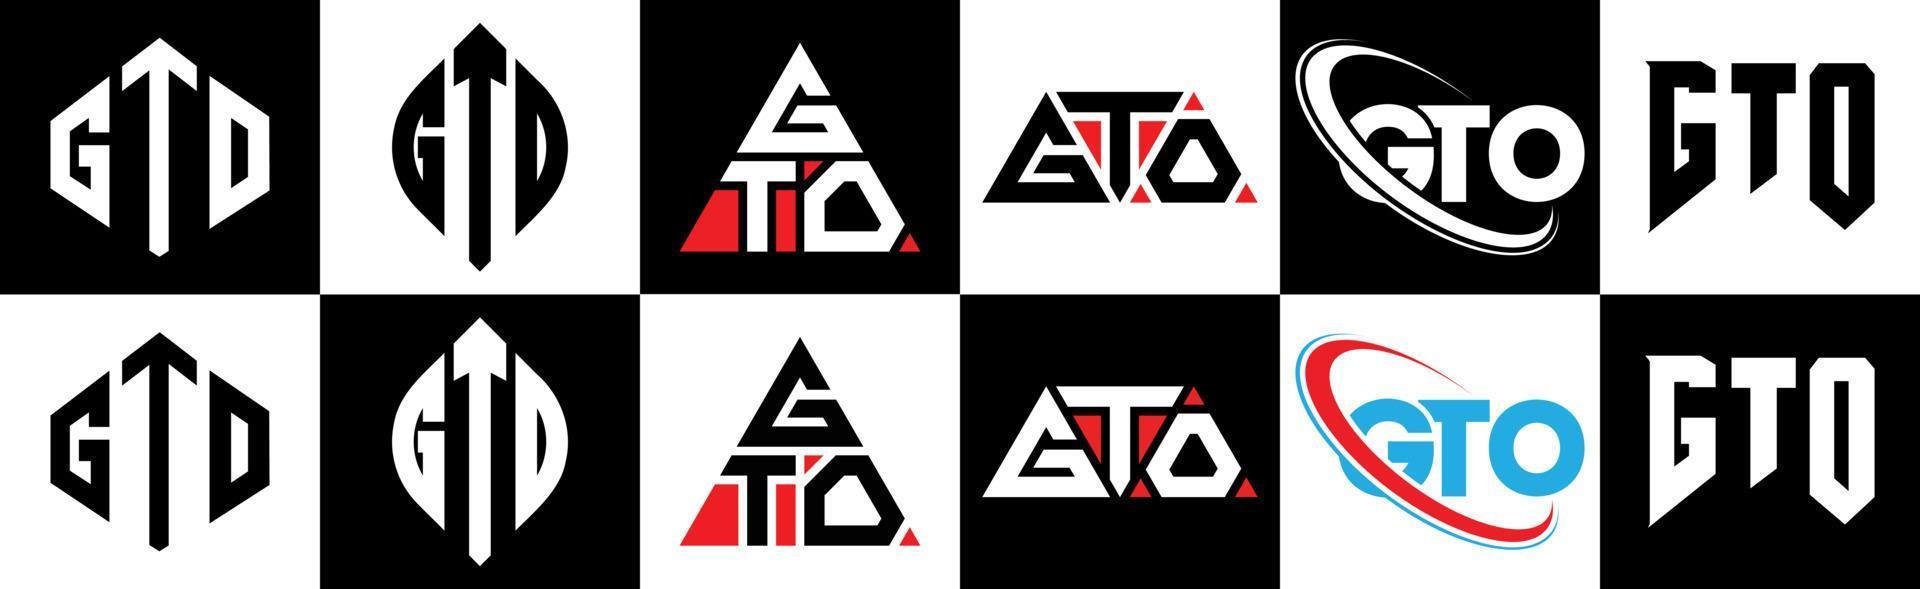 GTO letter logo design in six style. GTO polygon, circle, triangle, hexagon, flat and simple style with black and white color variation letter logo set in one artboard. GTO minimalist and classic logo vector